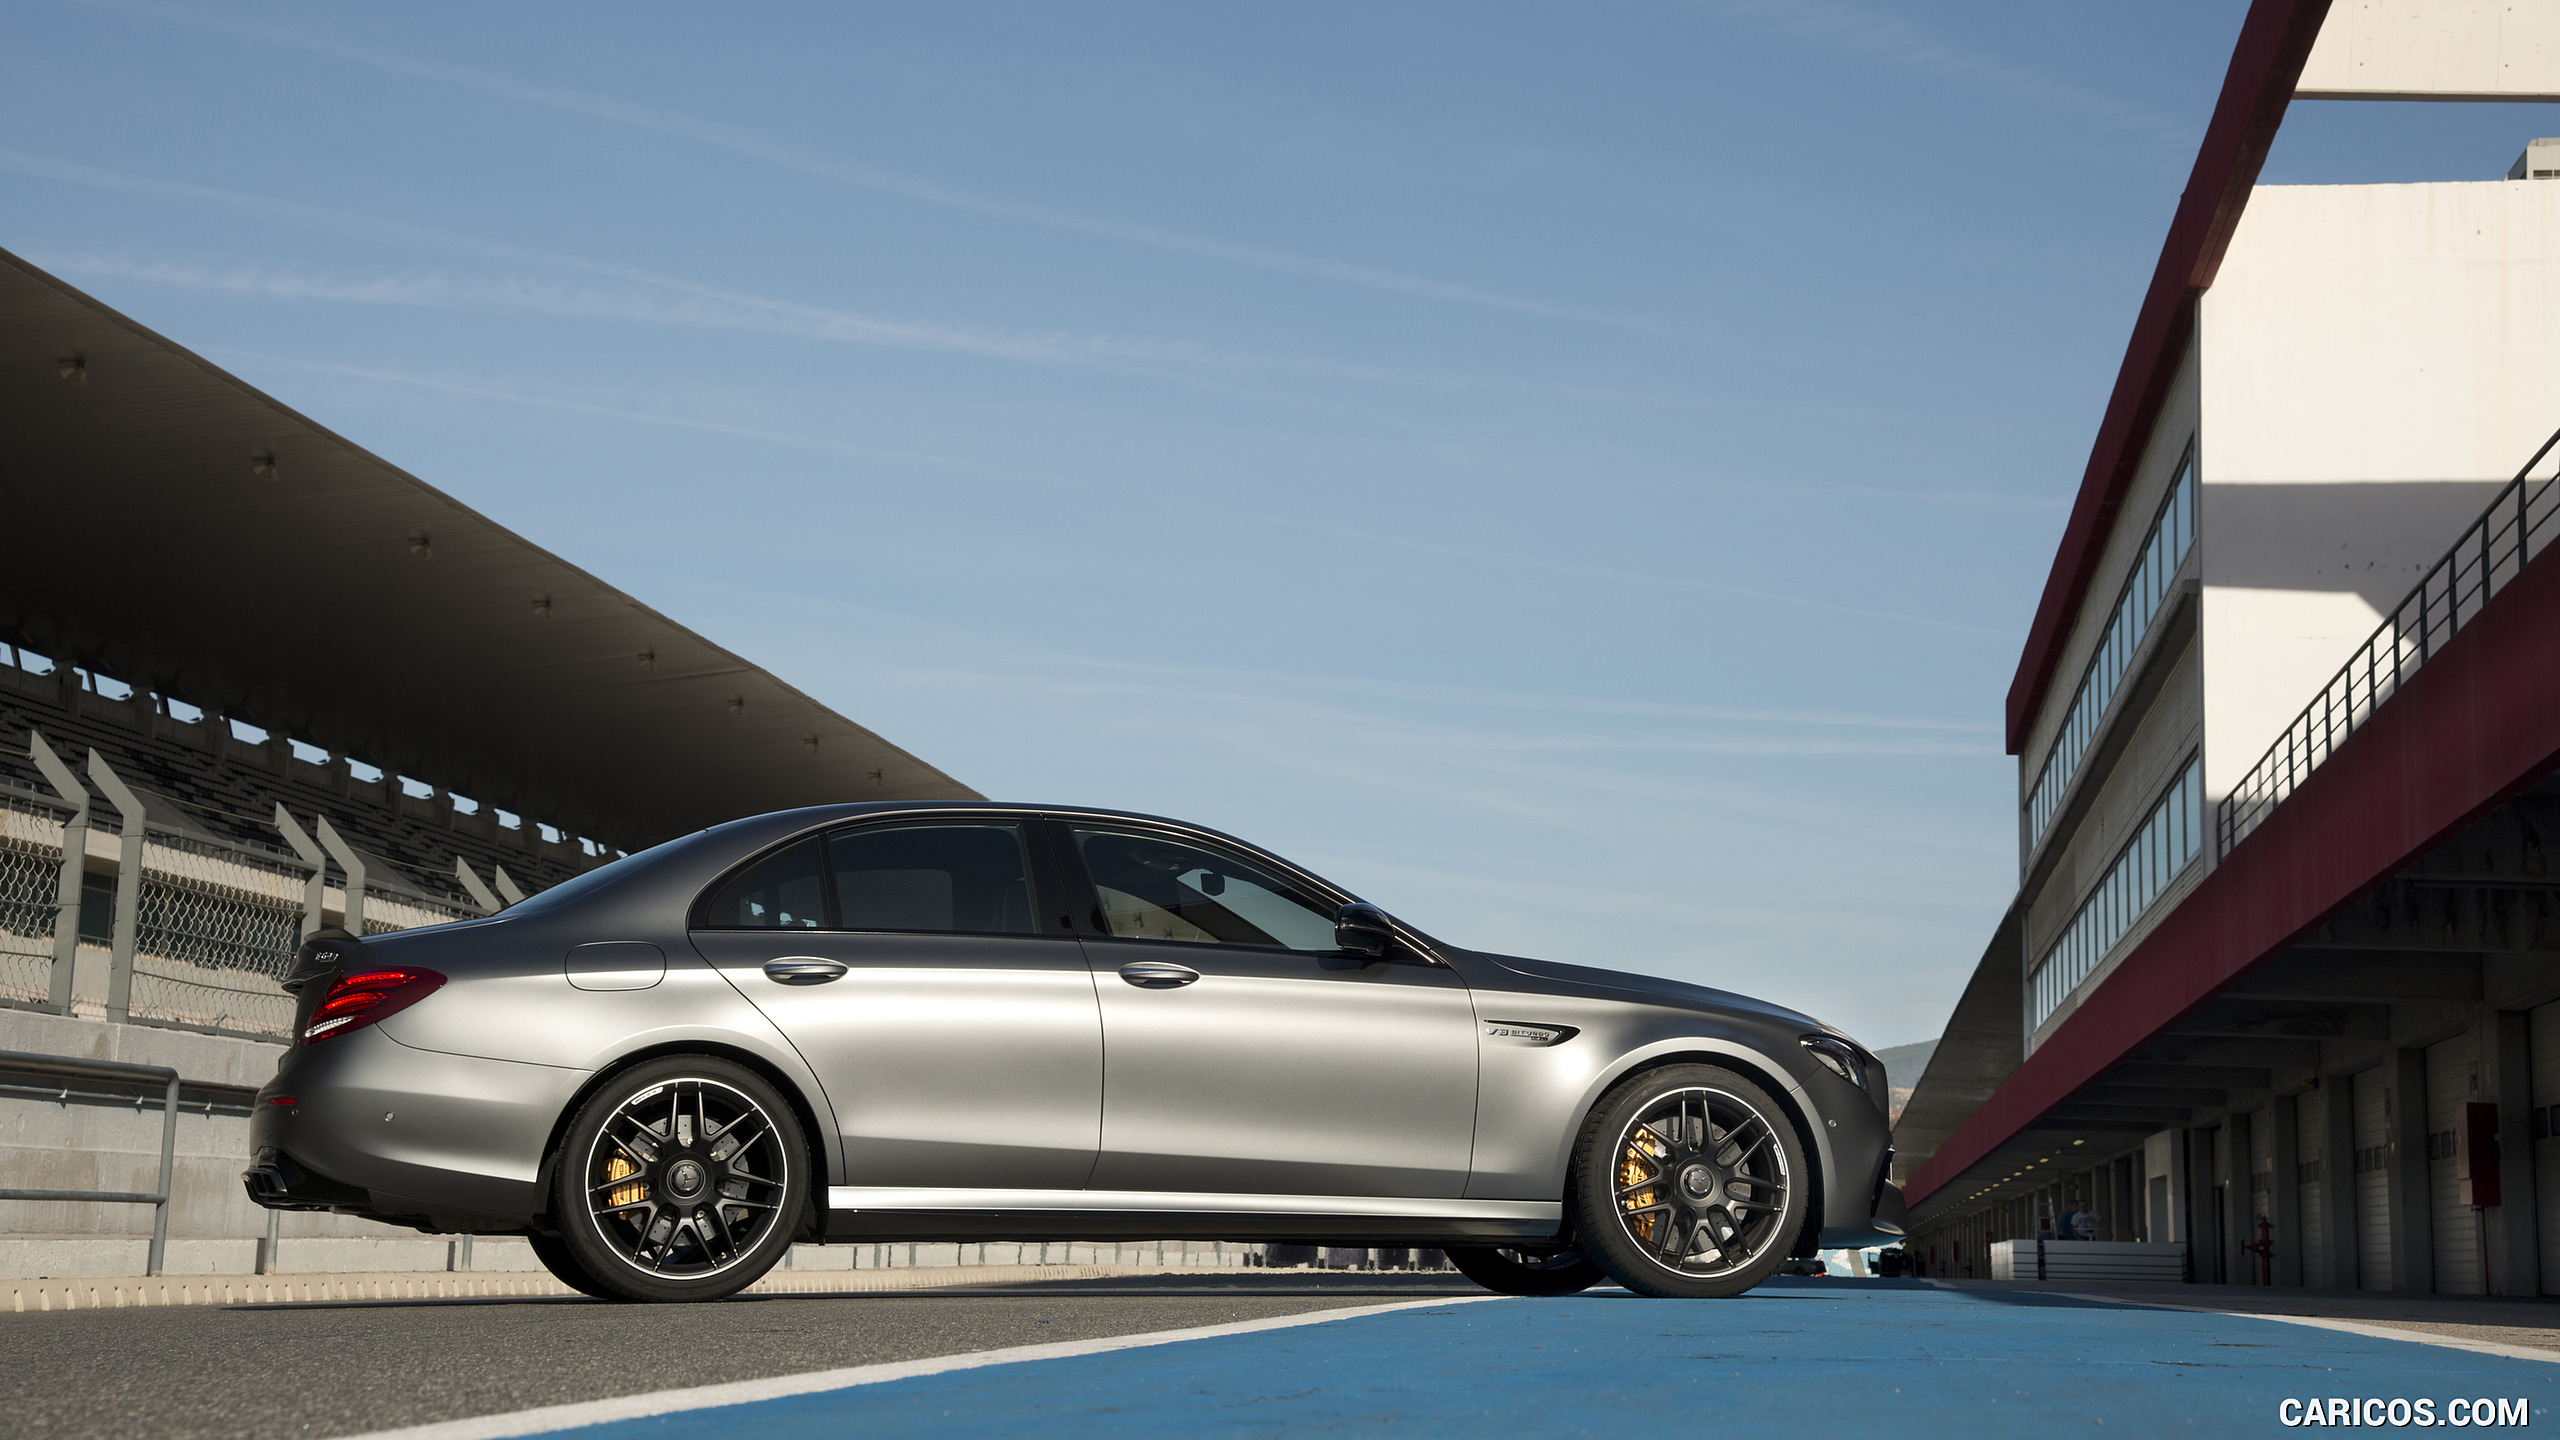 2018 Mercedes-AMG E63 S 4MATIC+ - Side, #282 of 323